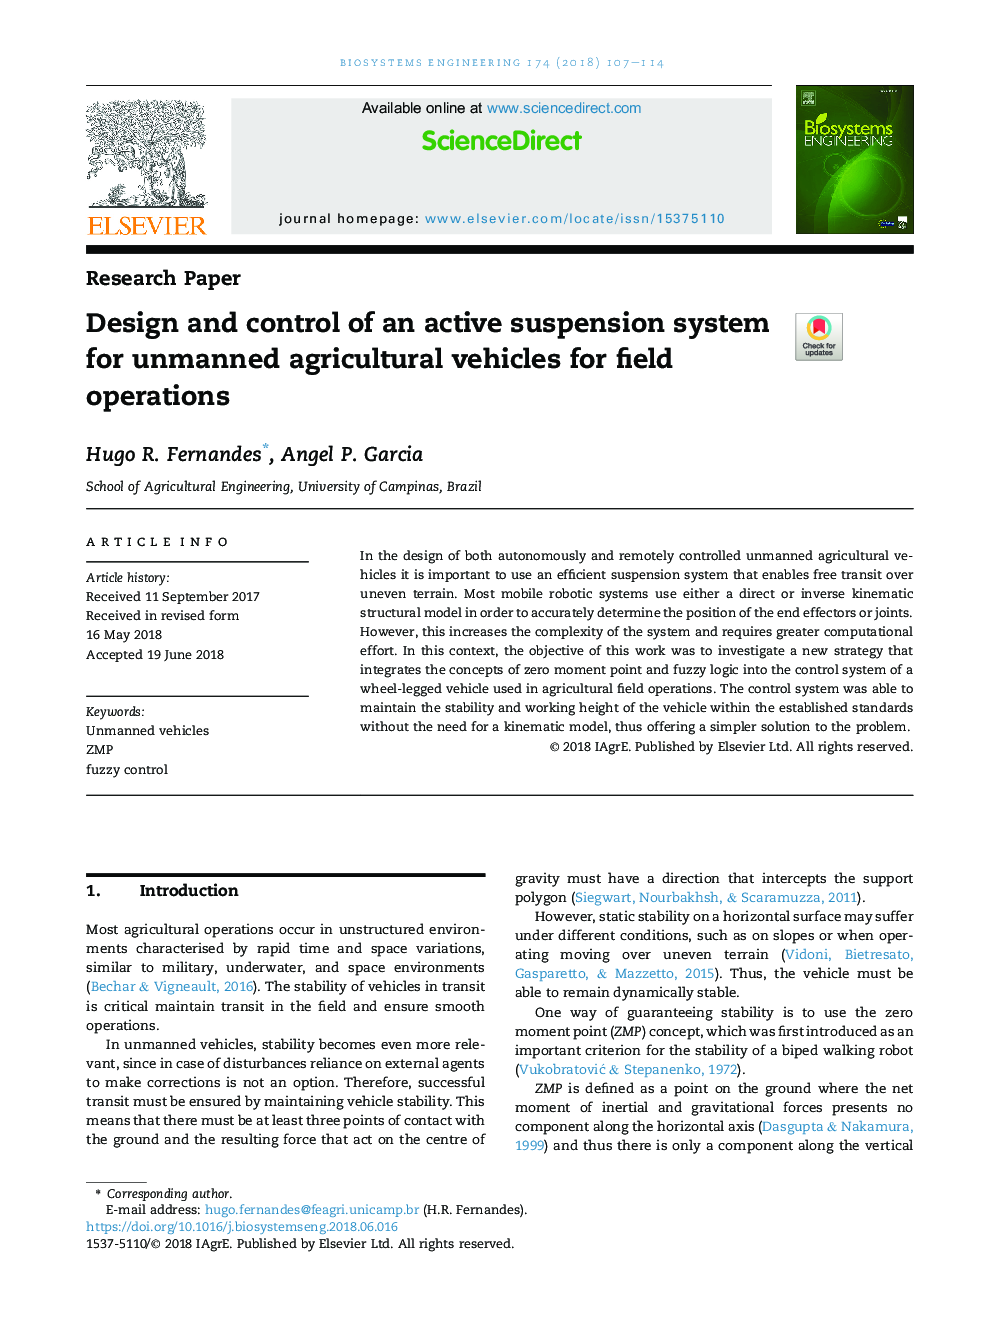 Design and control of an active suspension system for unmanned agricultural vehicles for field operations